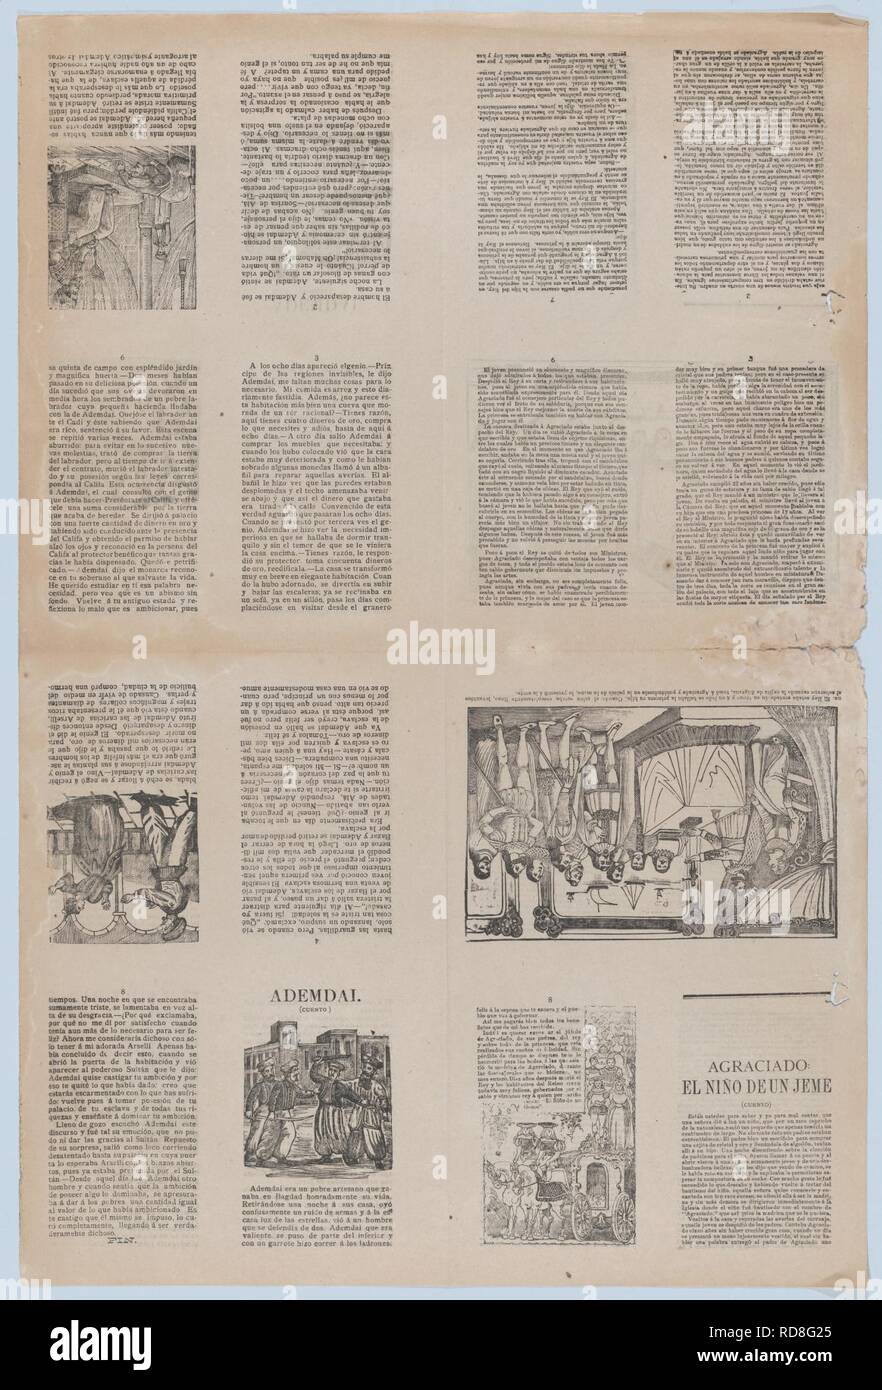 An uncut sheet printed on both sides with pages from 'Ademdai' and 'Agraciado- El niño de un jeme' Stock Photo